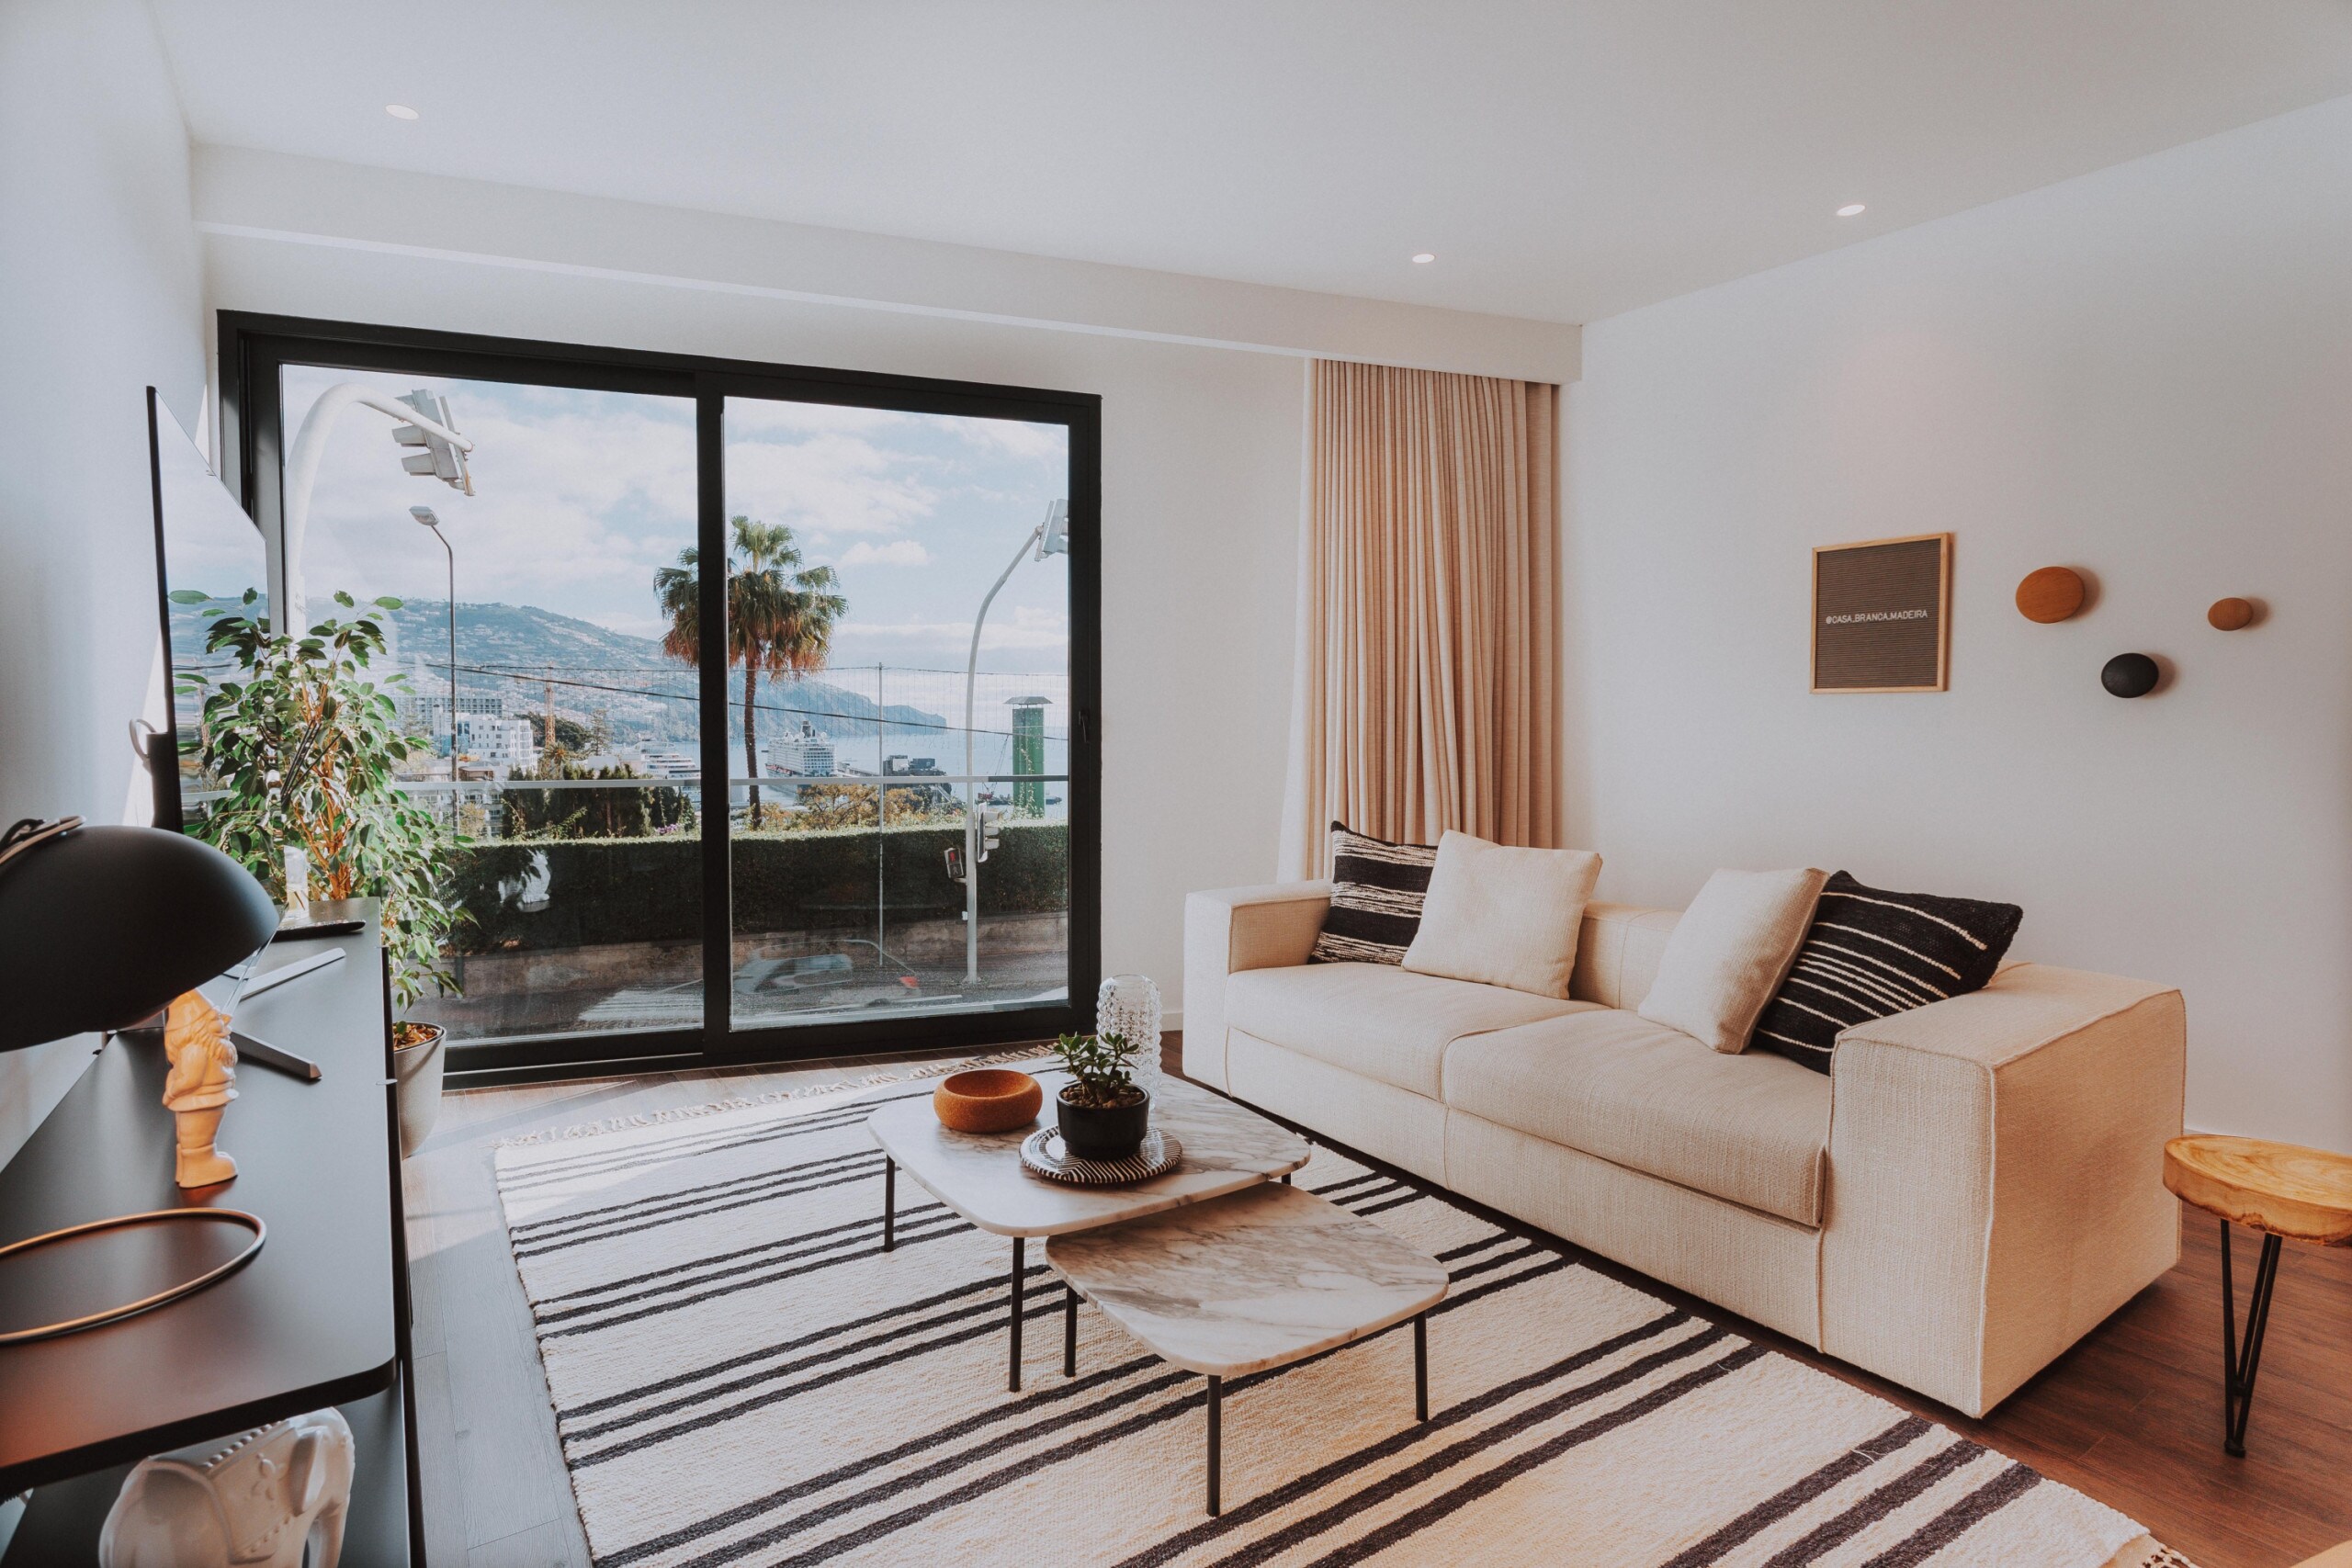 Property Image 1 - Lovely Light Apartment Overlooking the Bay of Funchal